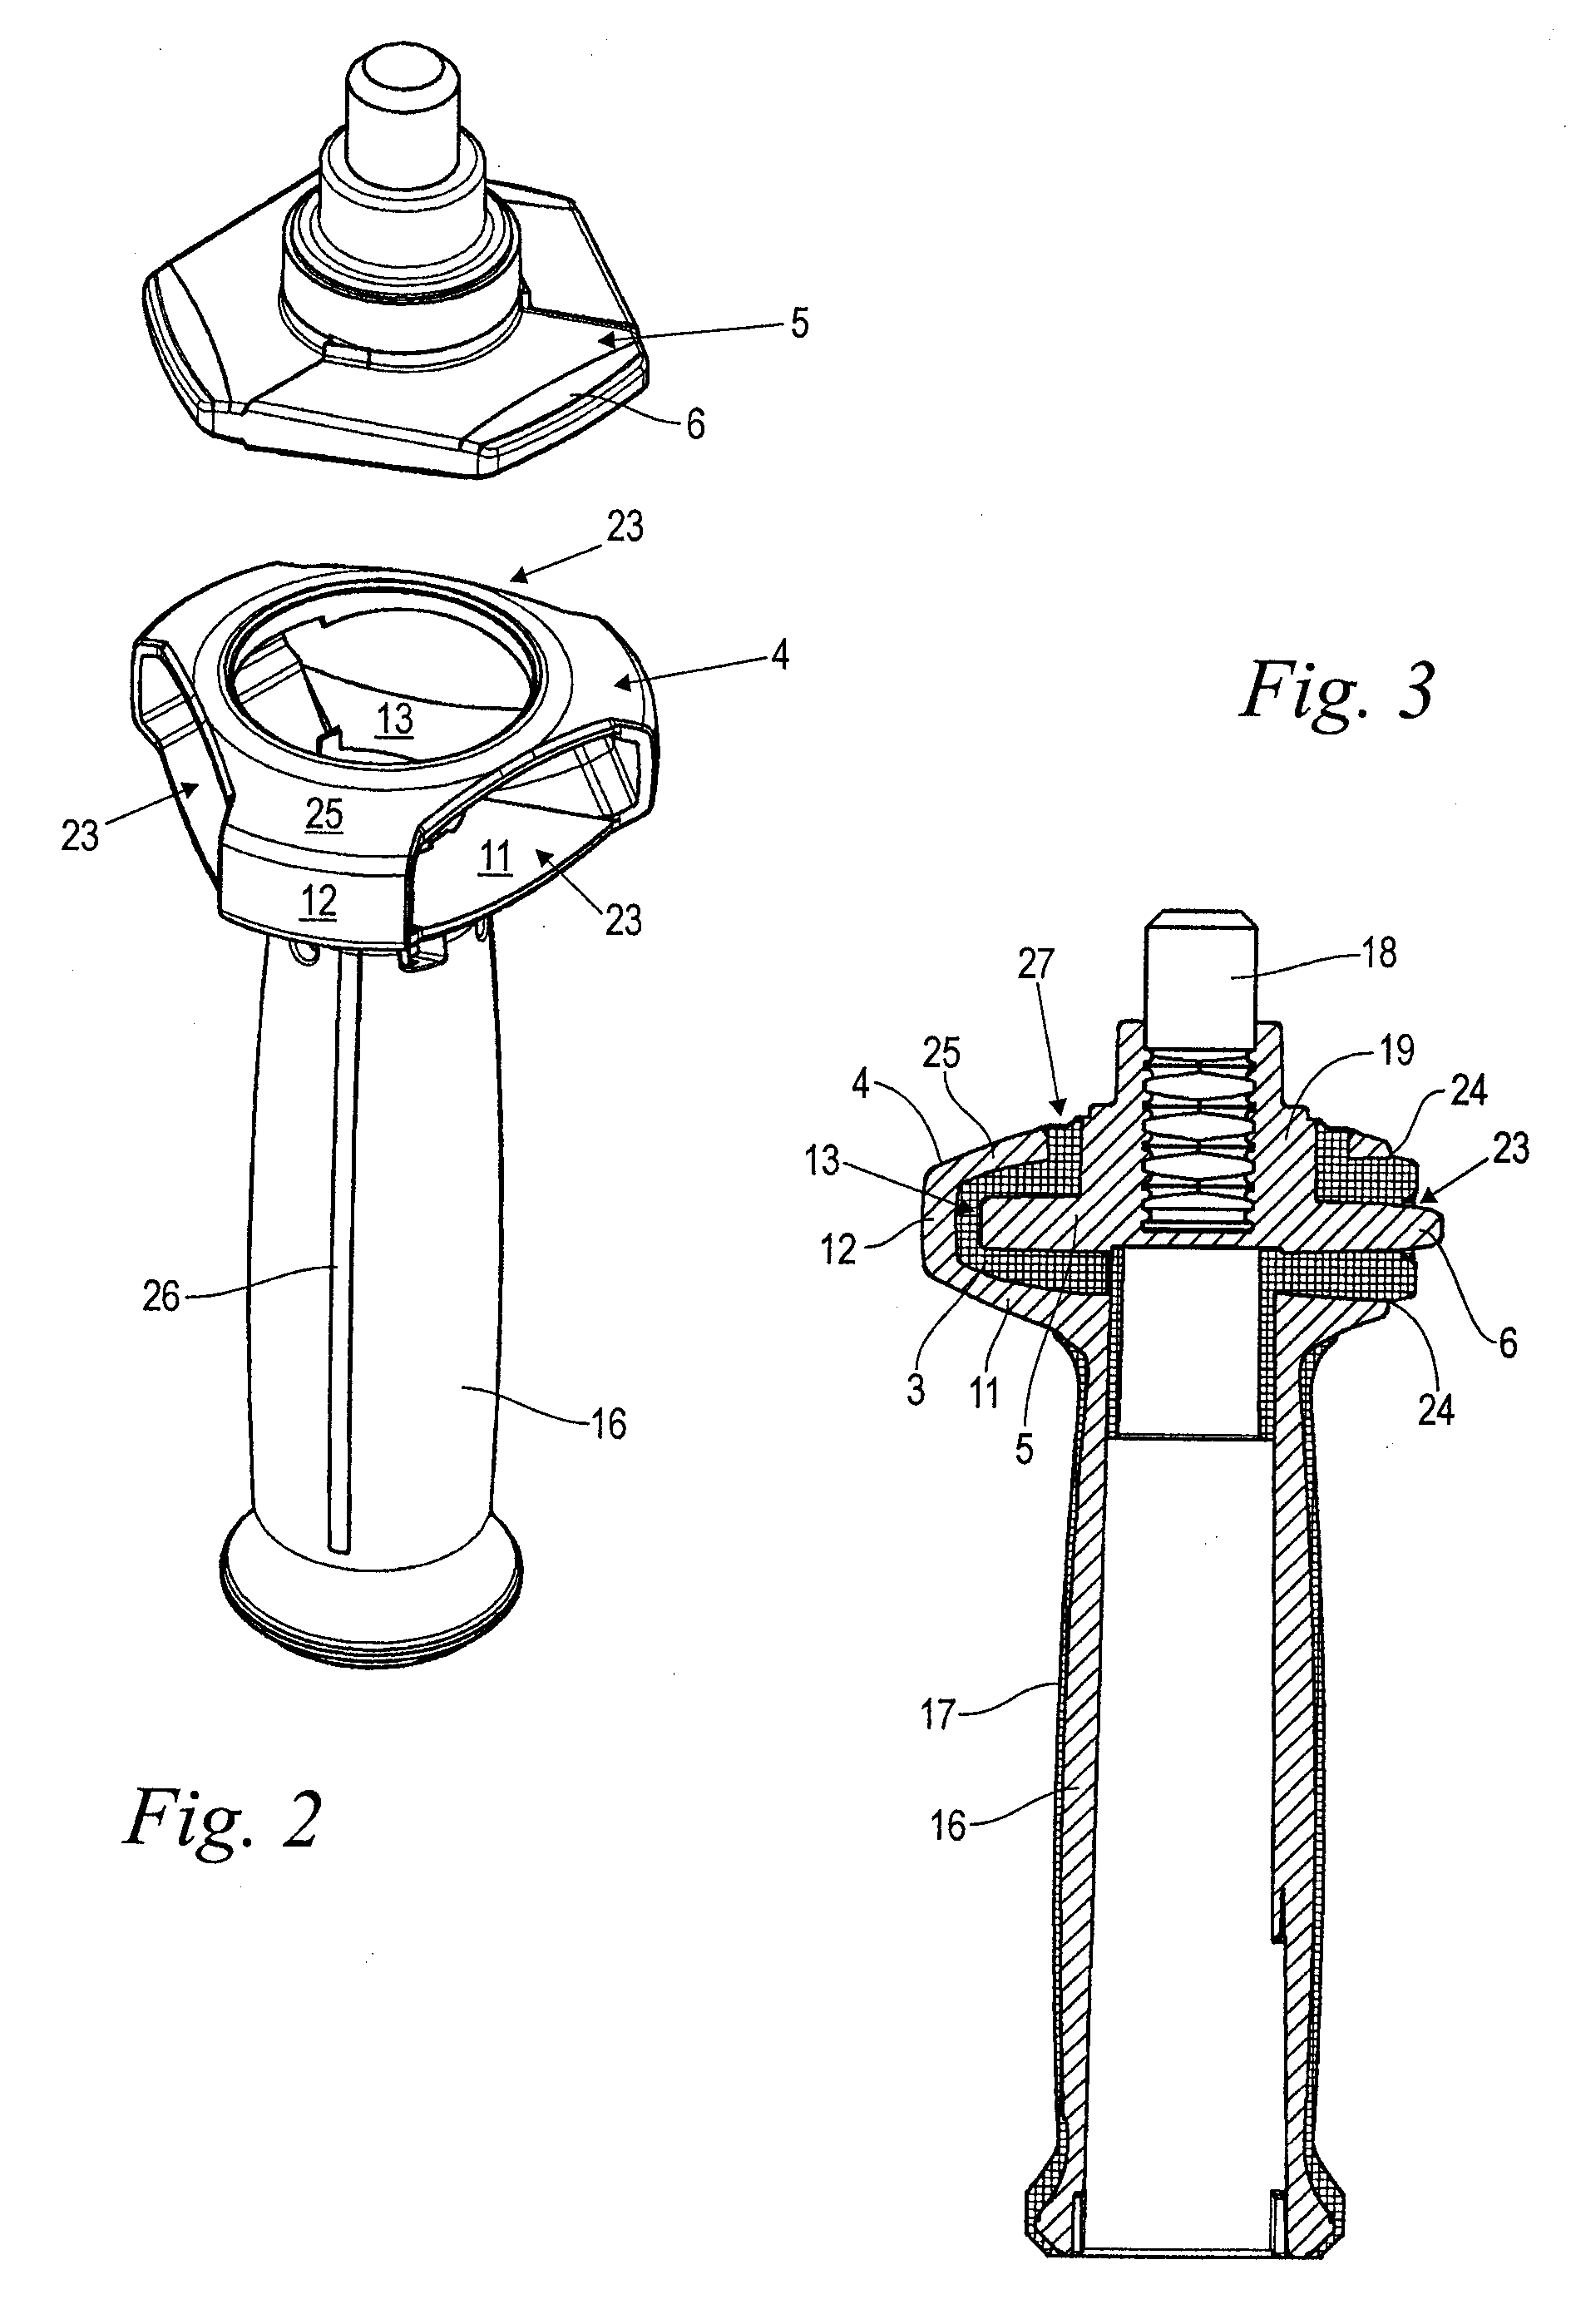 Auxiliary Handle for a Hand-Held Power Tool